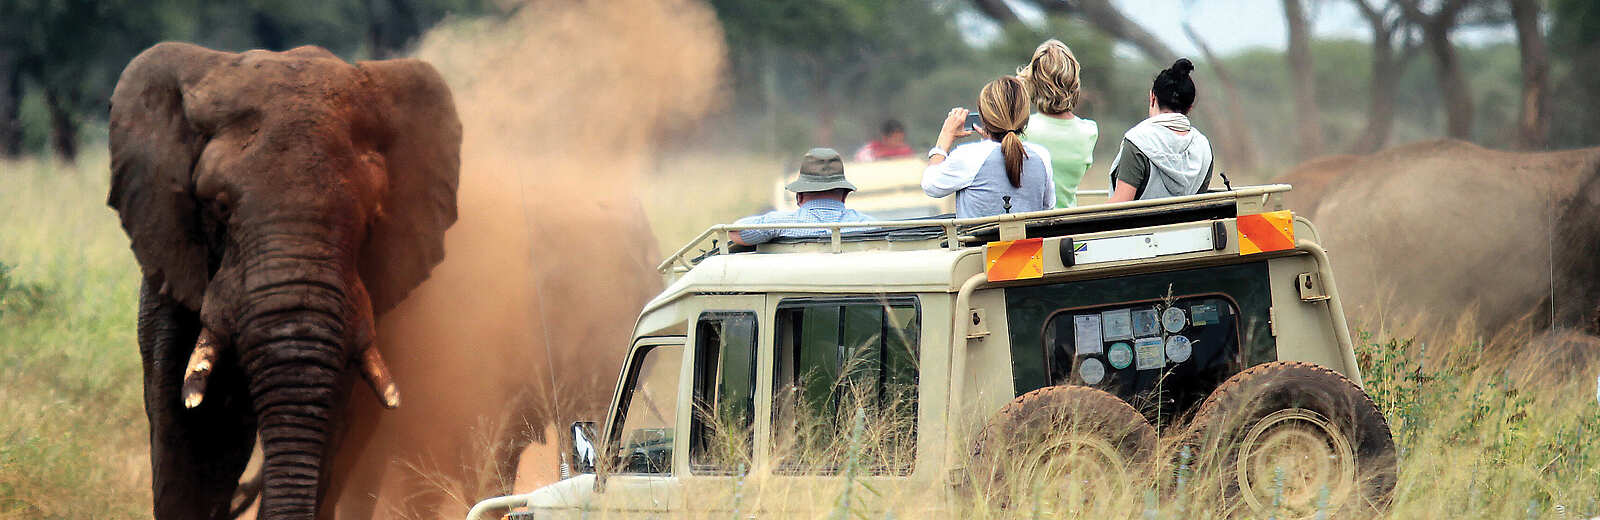 Private game drives in Tauck’s open-top safari vehicles in Serengeti national park – led by expert guides for unparalleled wildlife viewing.